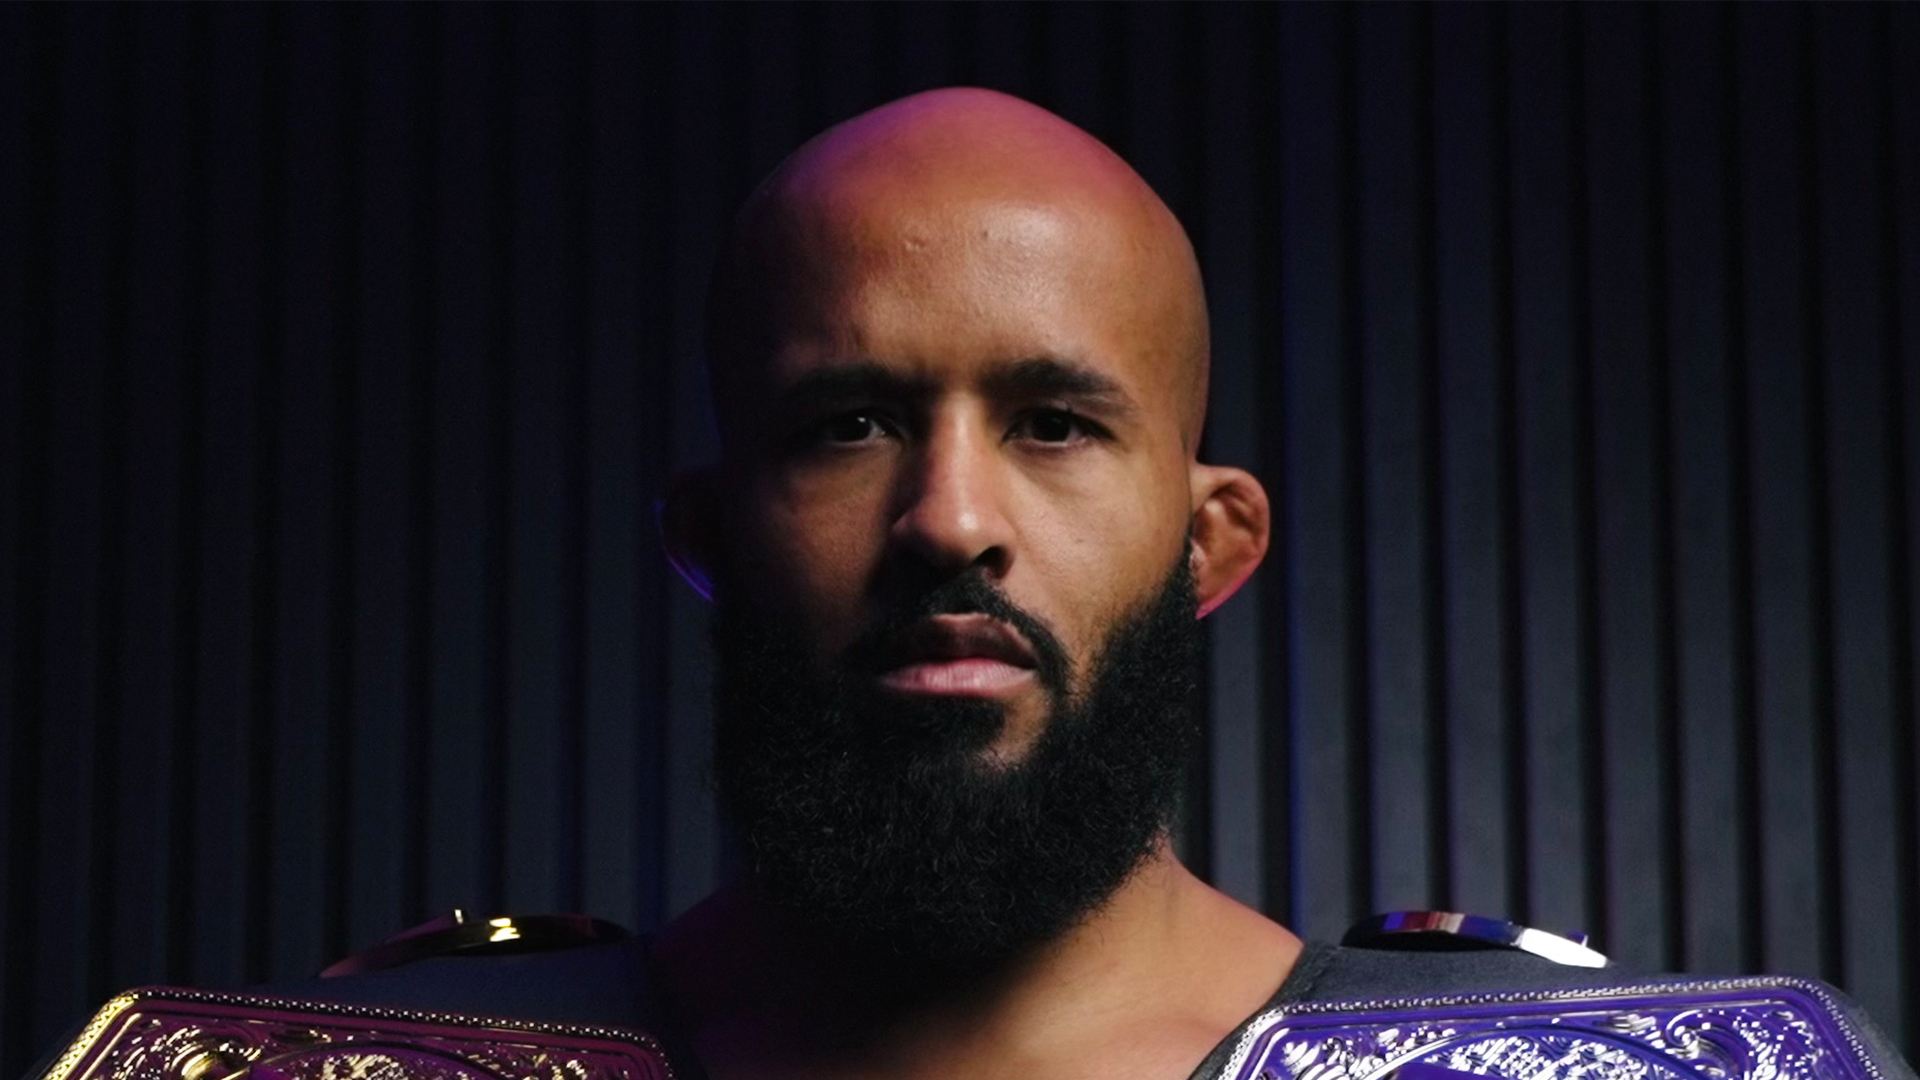 UFC legend Demetrious Johnson in major new career change as he goes from brutal MMA to house-bound job [Video]